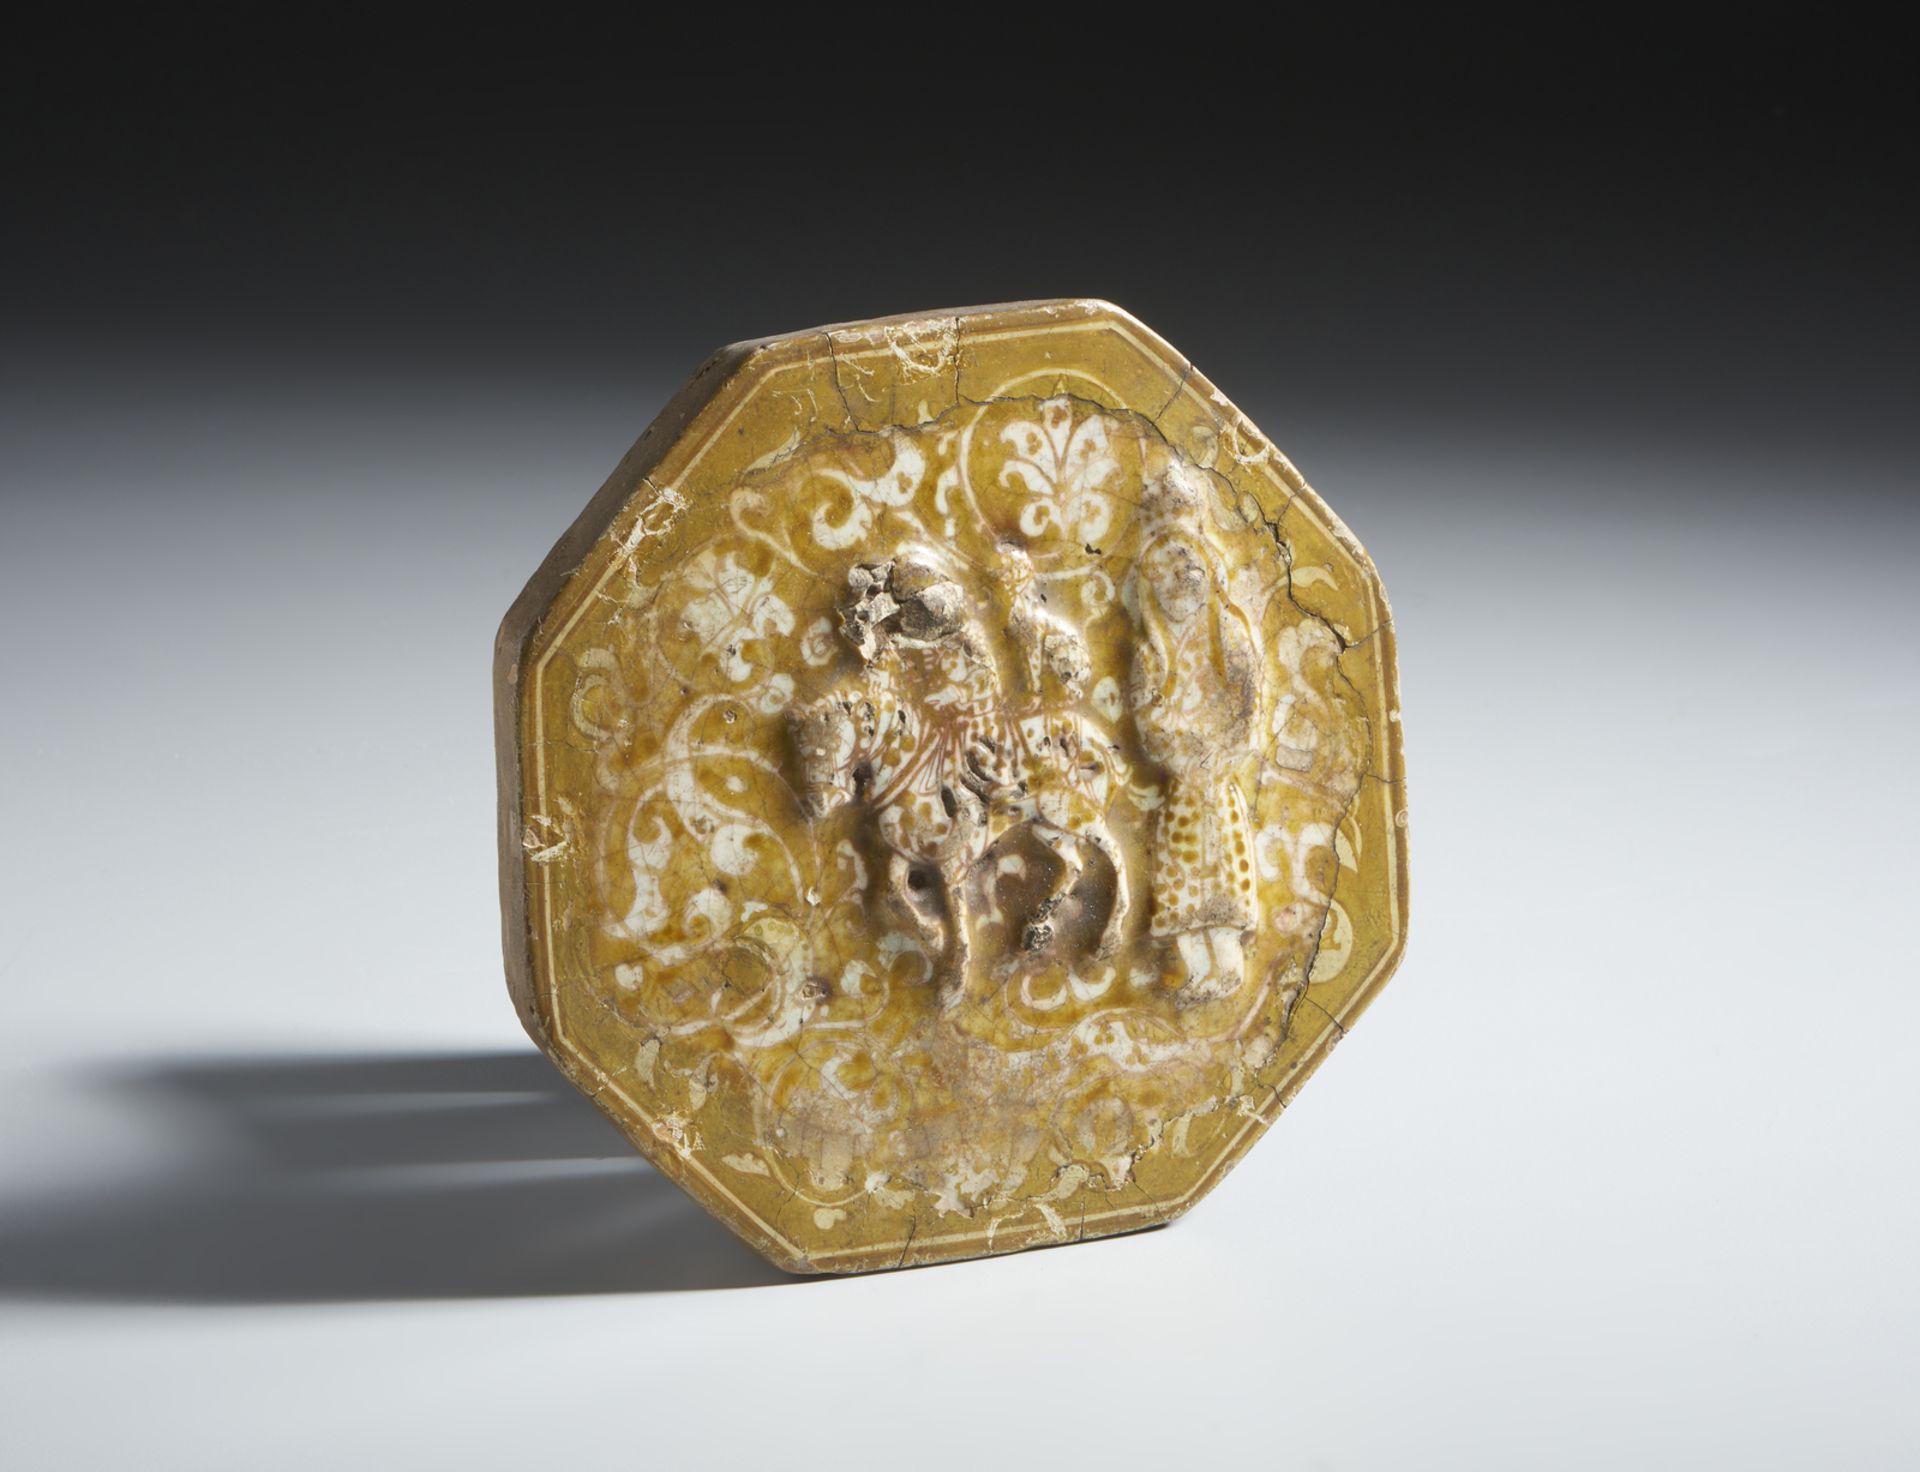 Octagonal tile with figurative decoration in relief Iran, 13th-14th century Frit body, moulded - Image 2 of 3